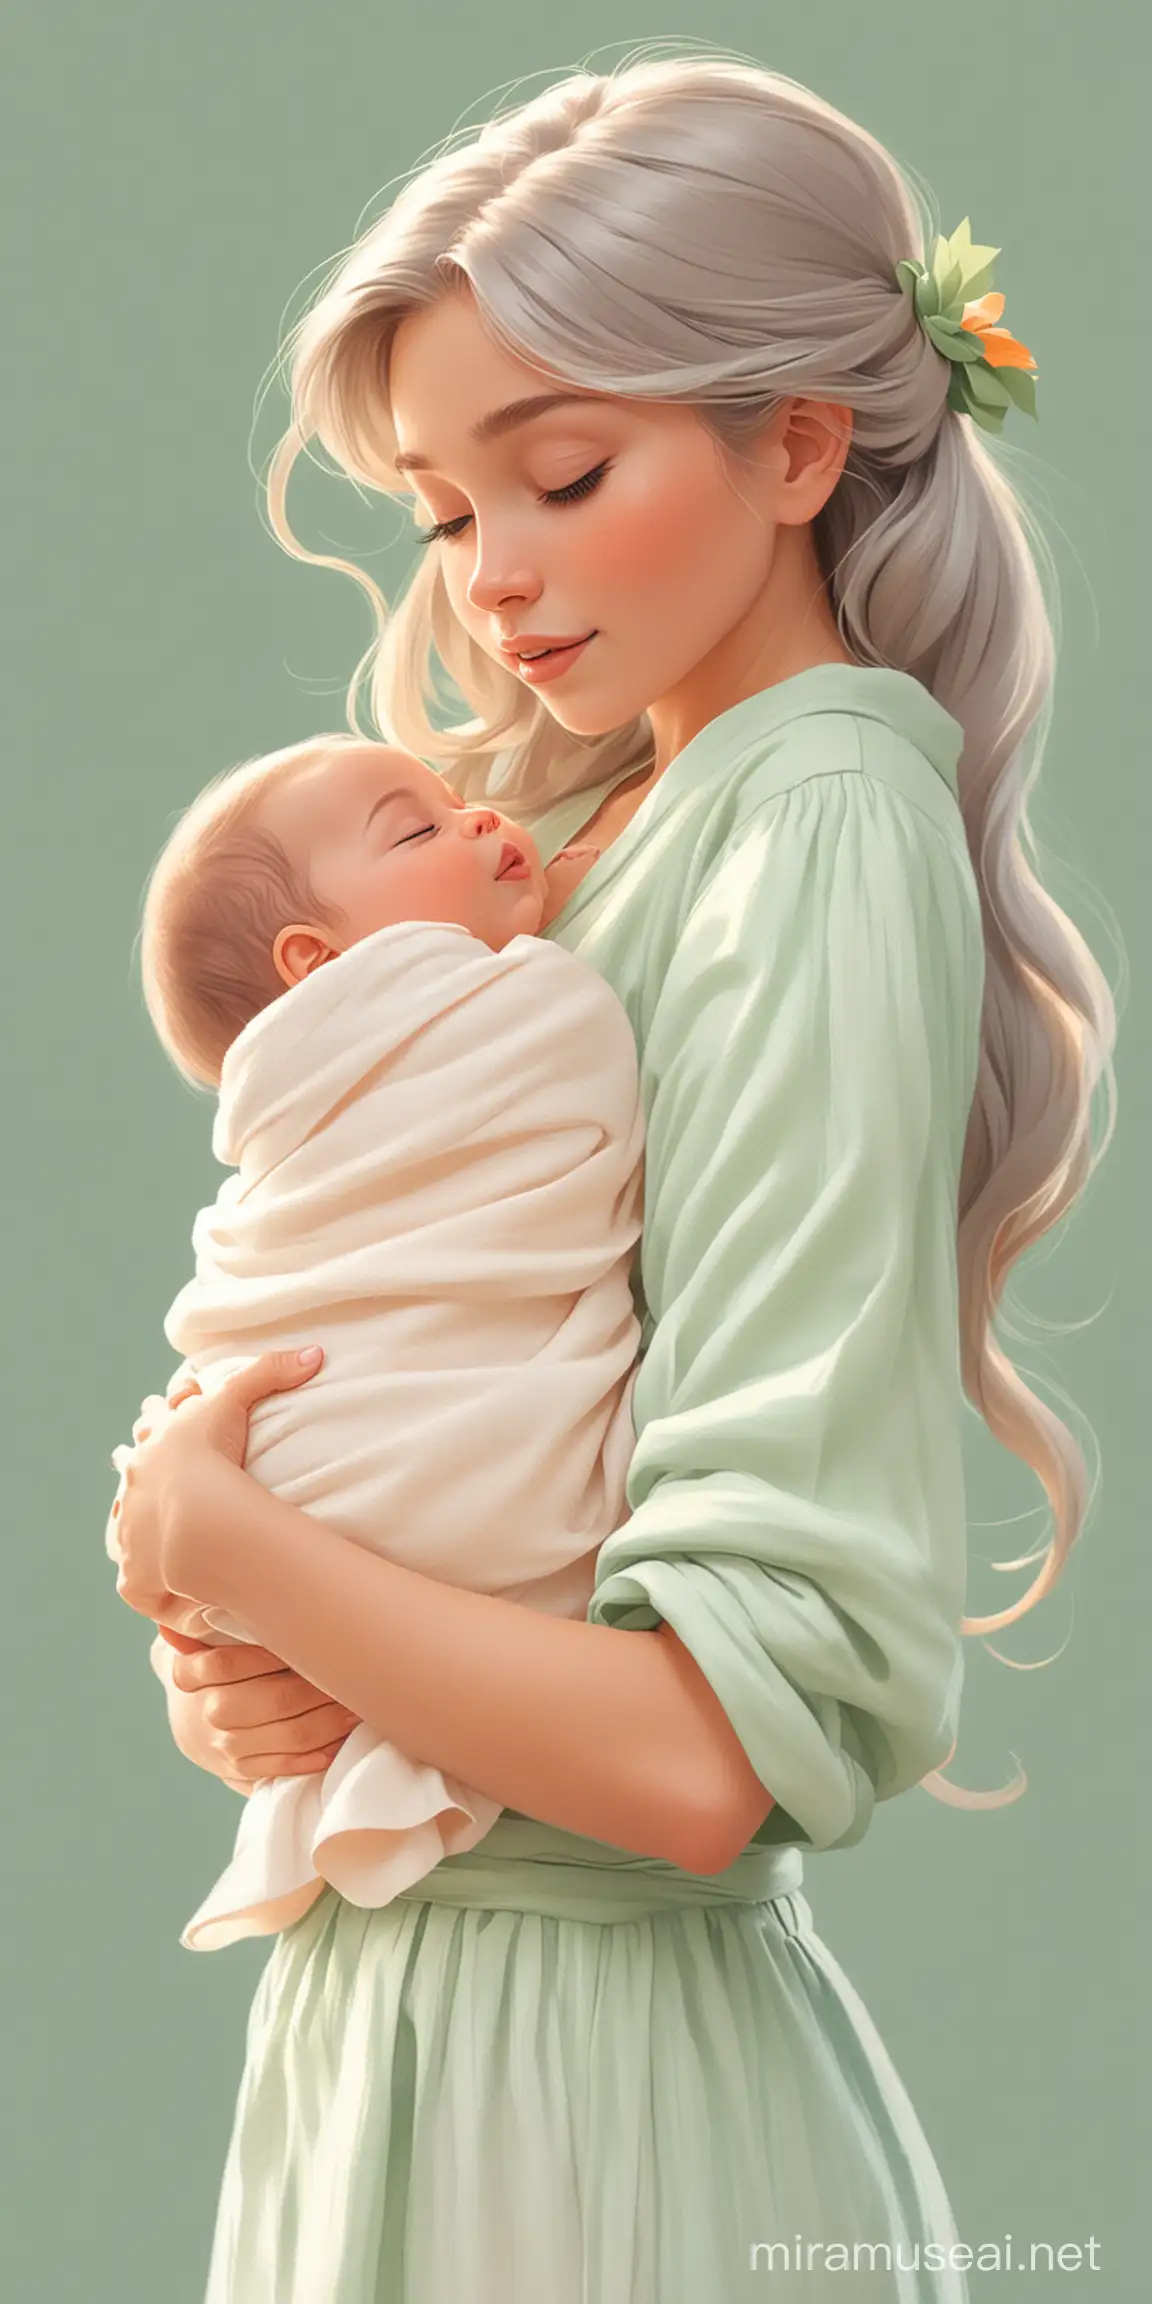 Young Mother Holding Newborn Baby Disney Animation Style in Pastel Colors